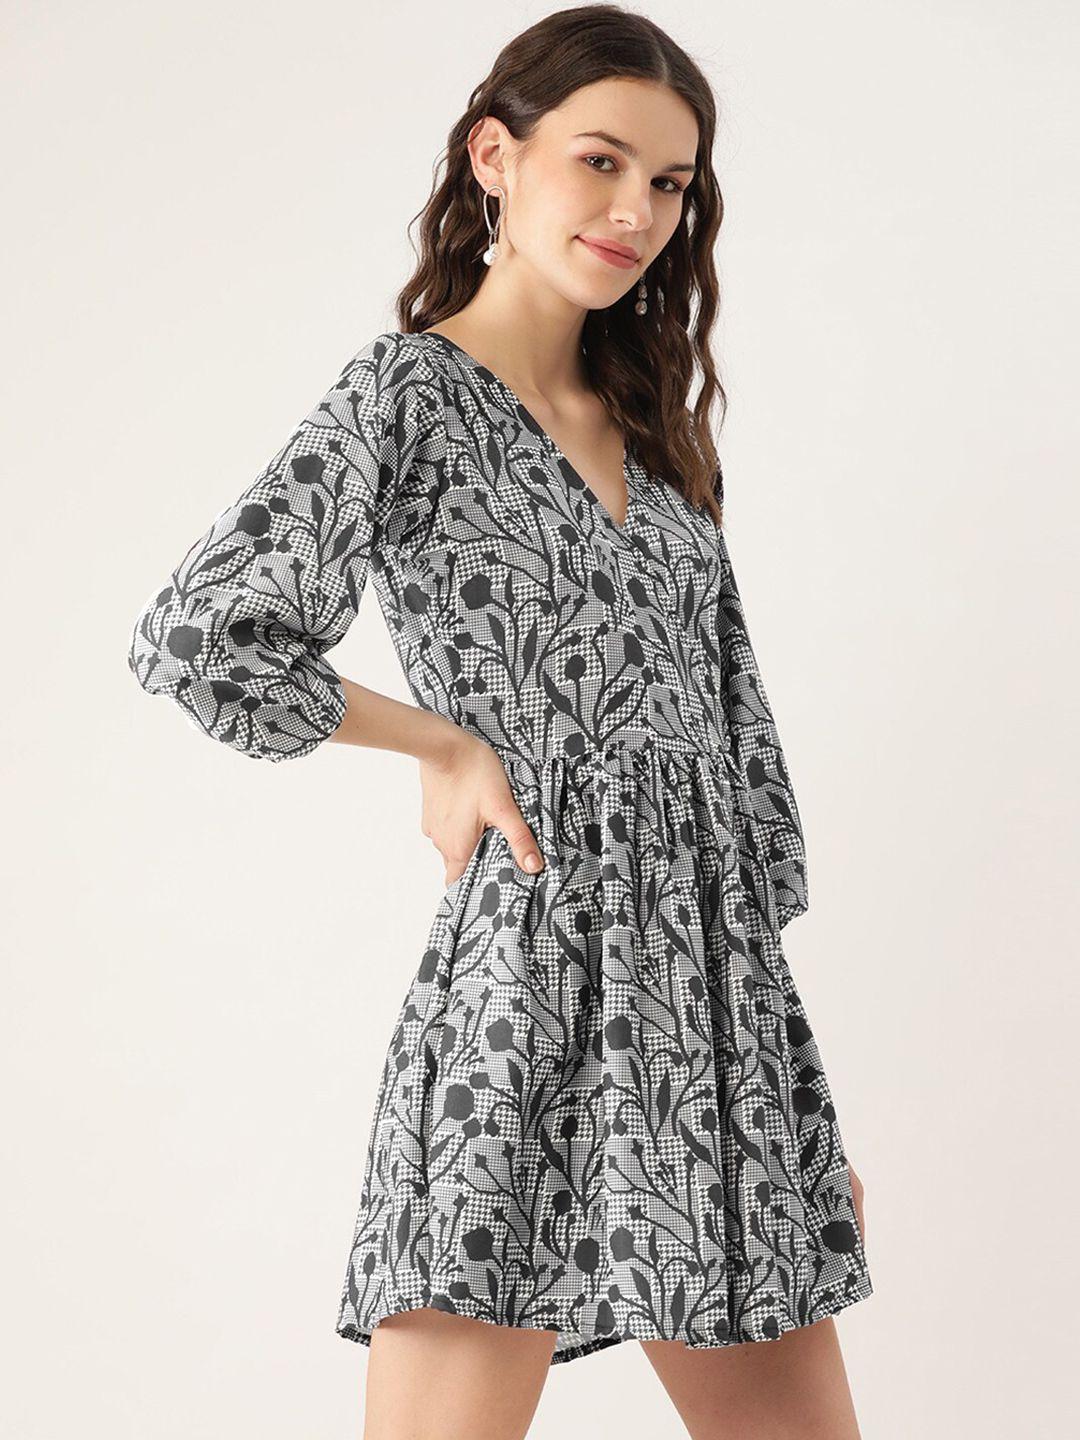 dressberry black floral printed v-neck puff sleeves gathered detail fit & flare mini dress